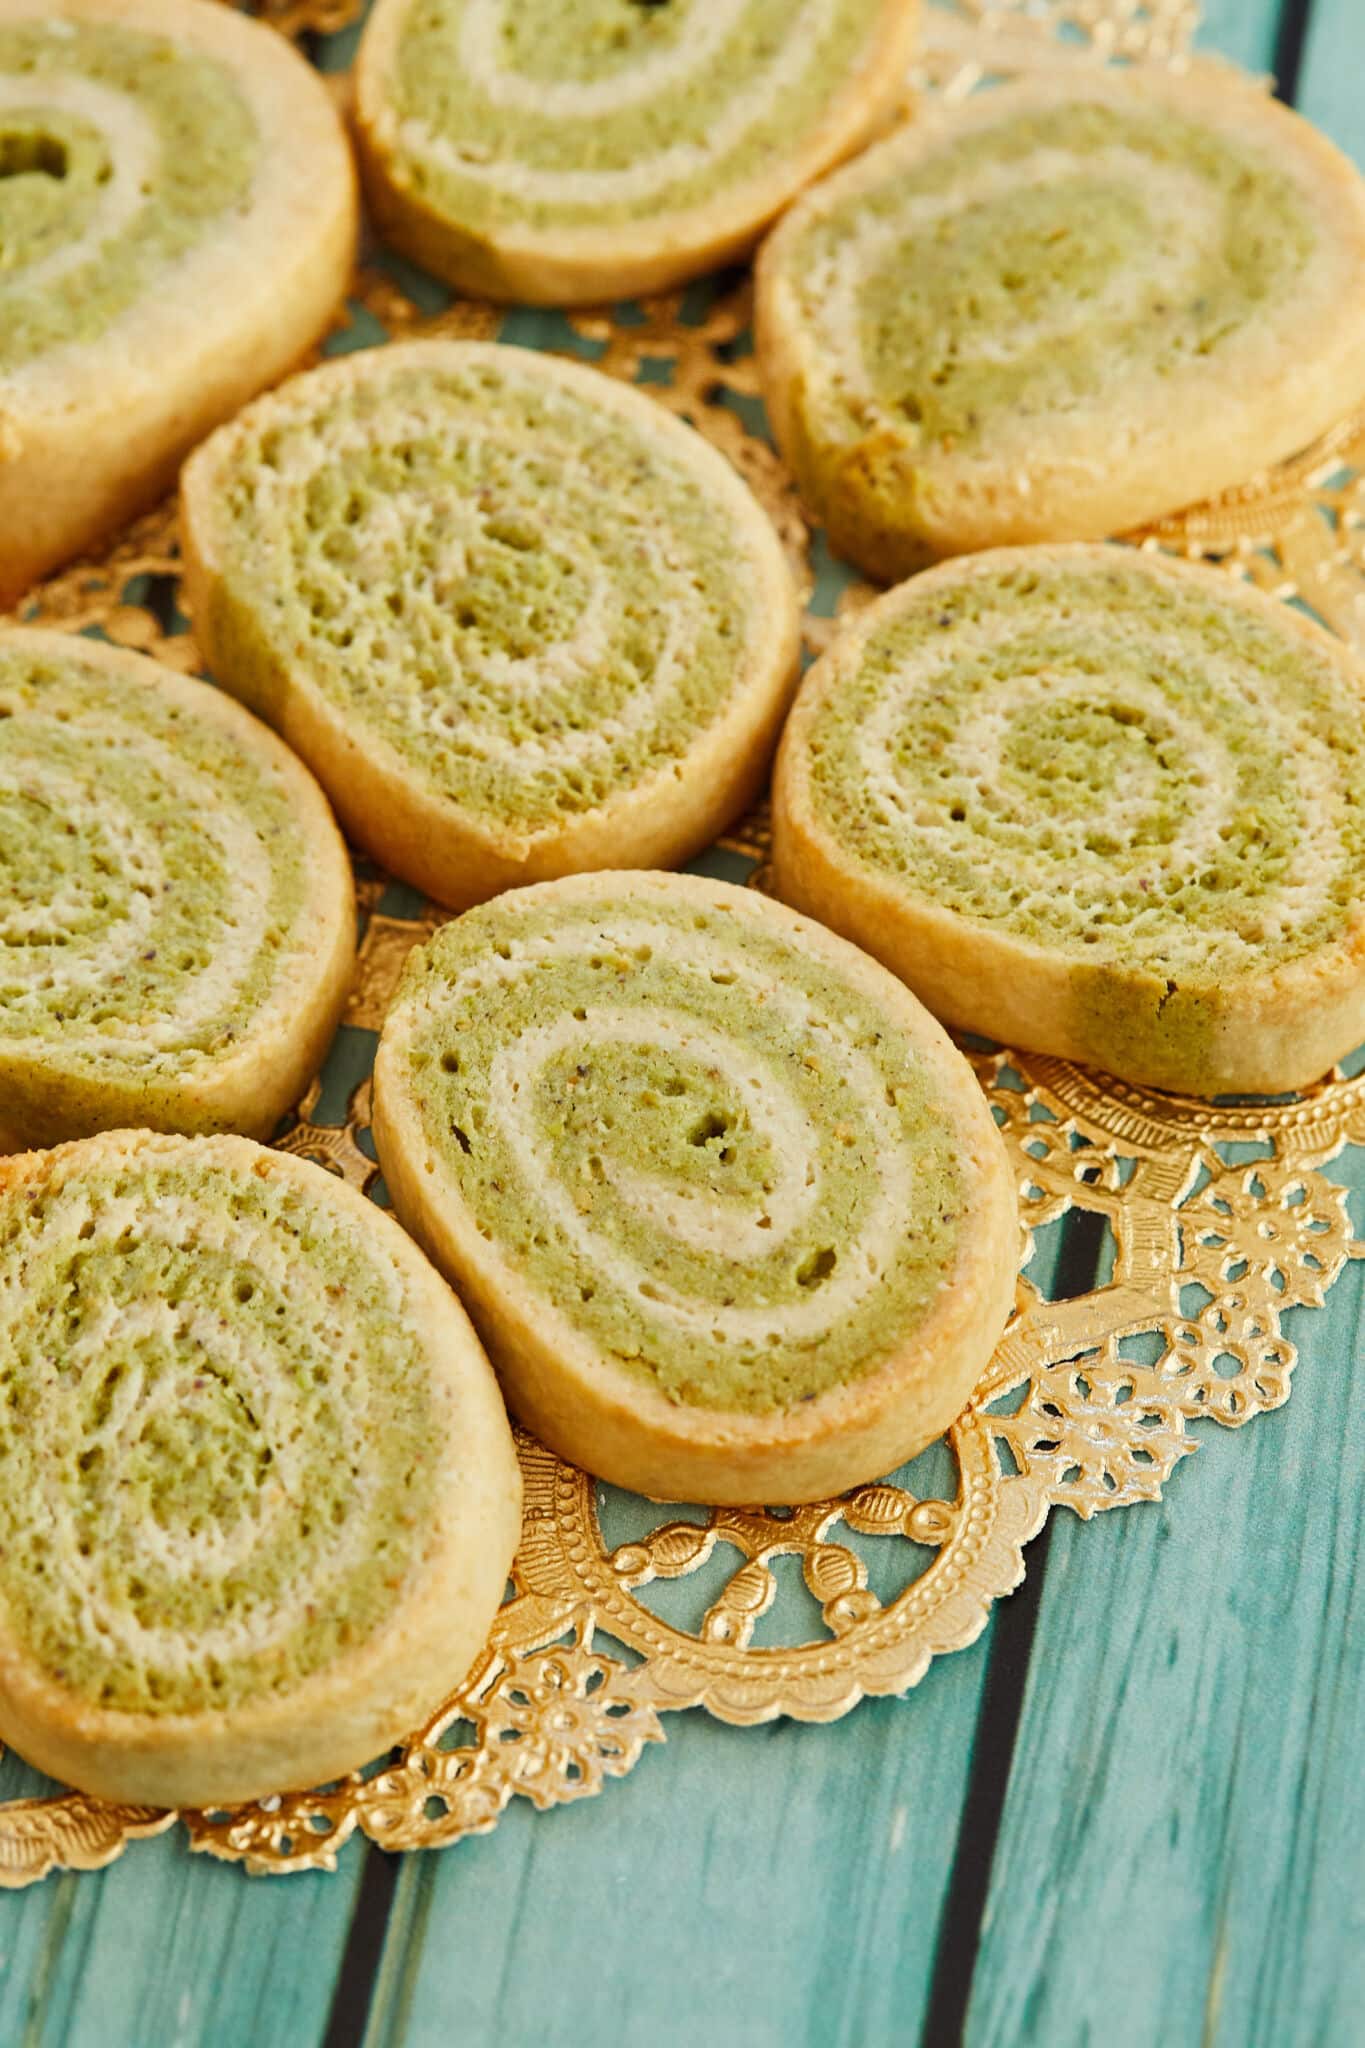 A display of kaju pista rolls sliced and laid out on a gold doily, on a wooden table.